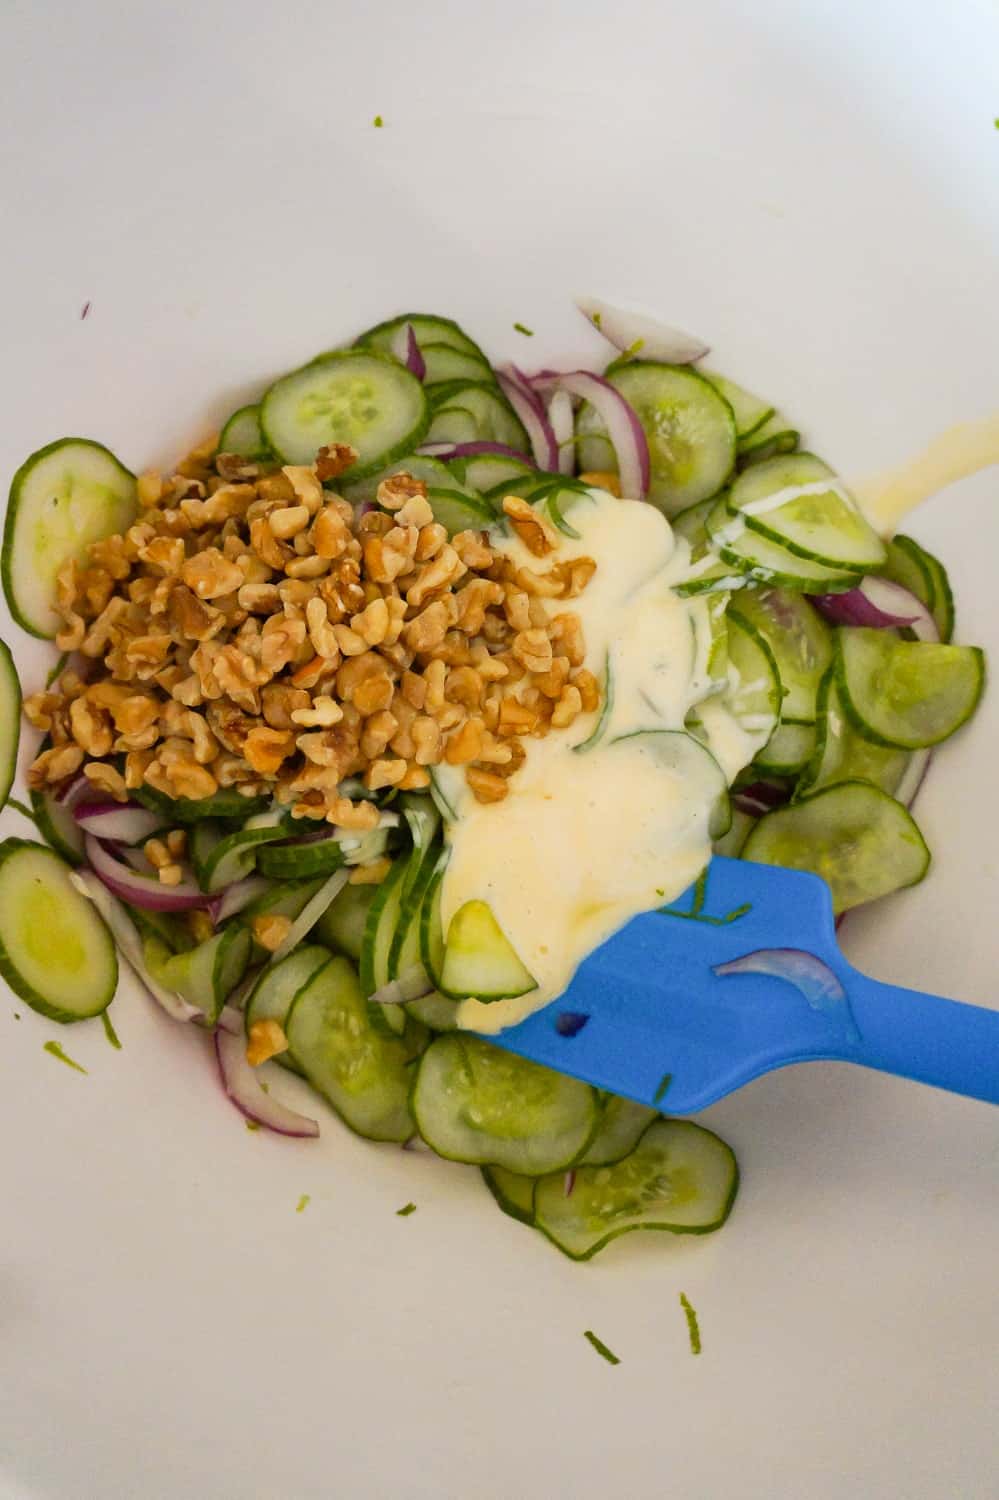 thinly sliced cucumbers, red onions, chopped walnuts and coleslaw dressing in a bowl